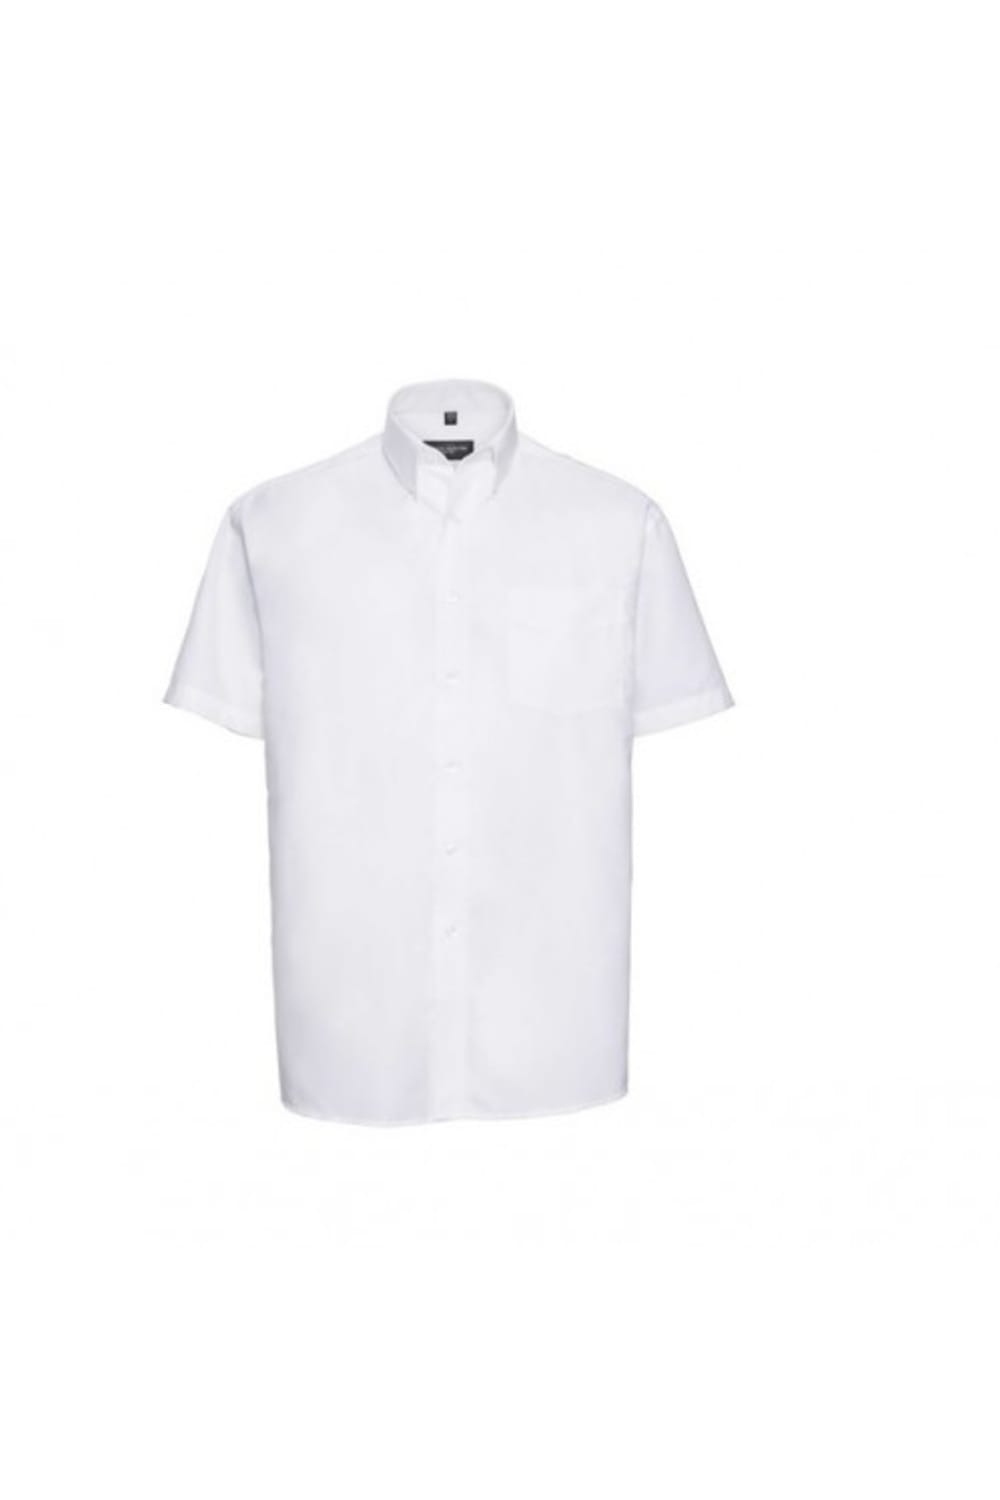 Russell Collection Mens Short Sleeve Easy Care Tailored Oxford Shirt 